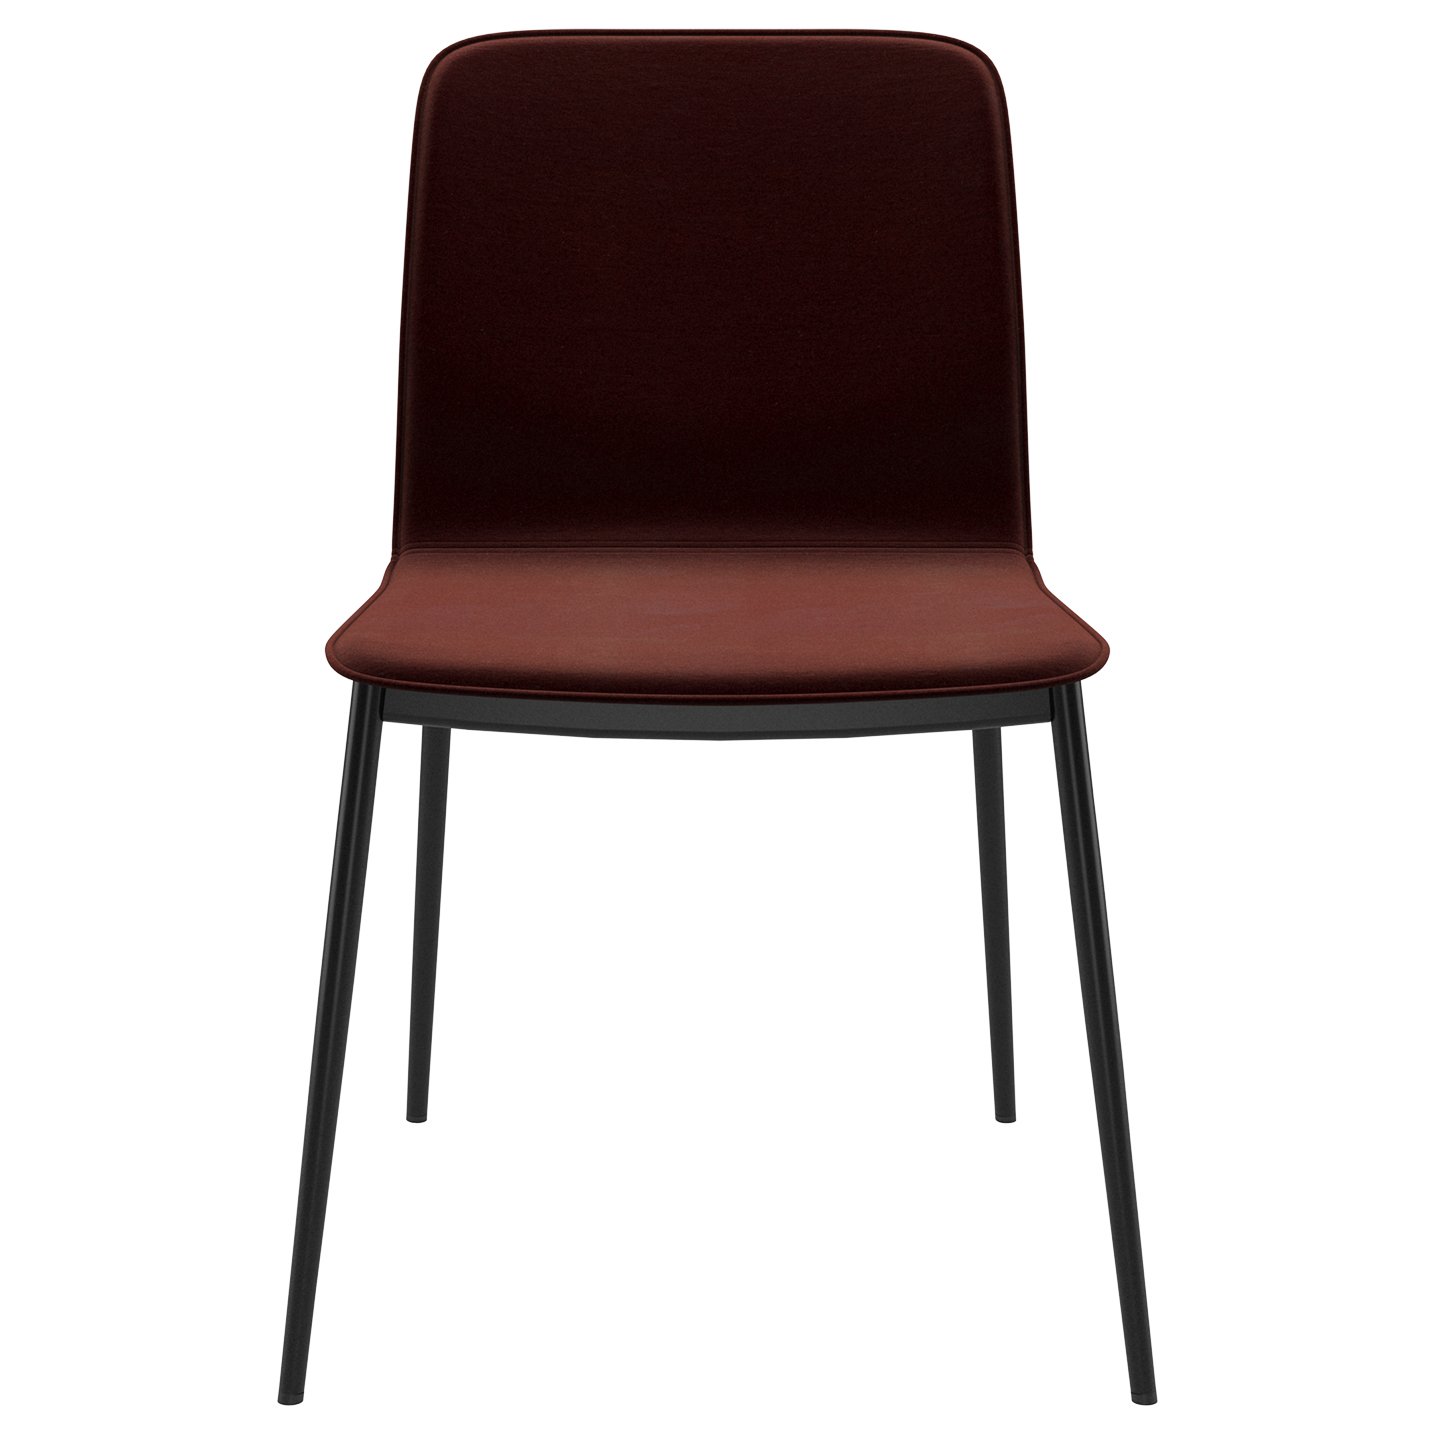 Newport guest chair from BoConcept